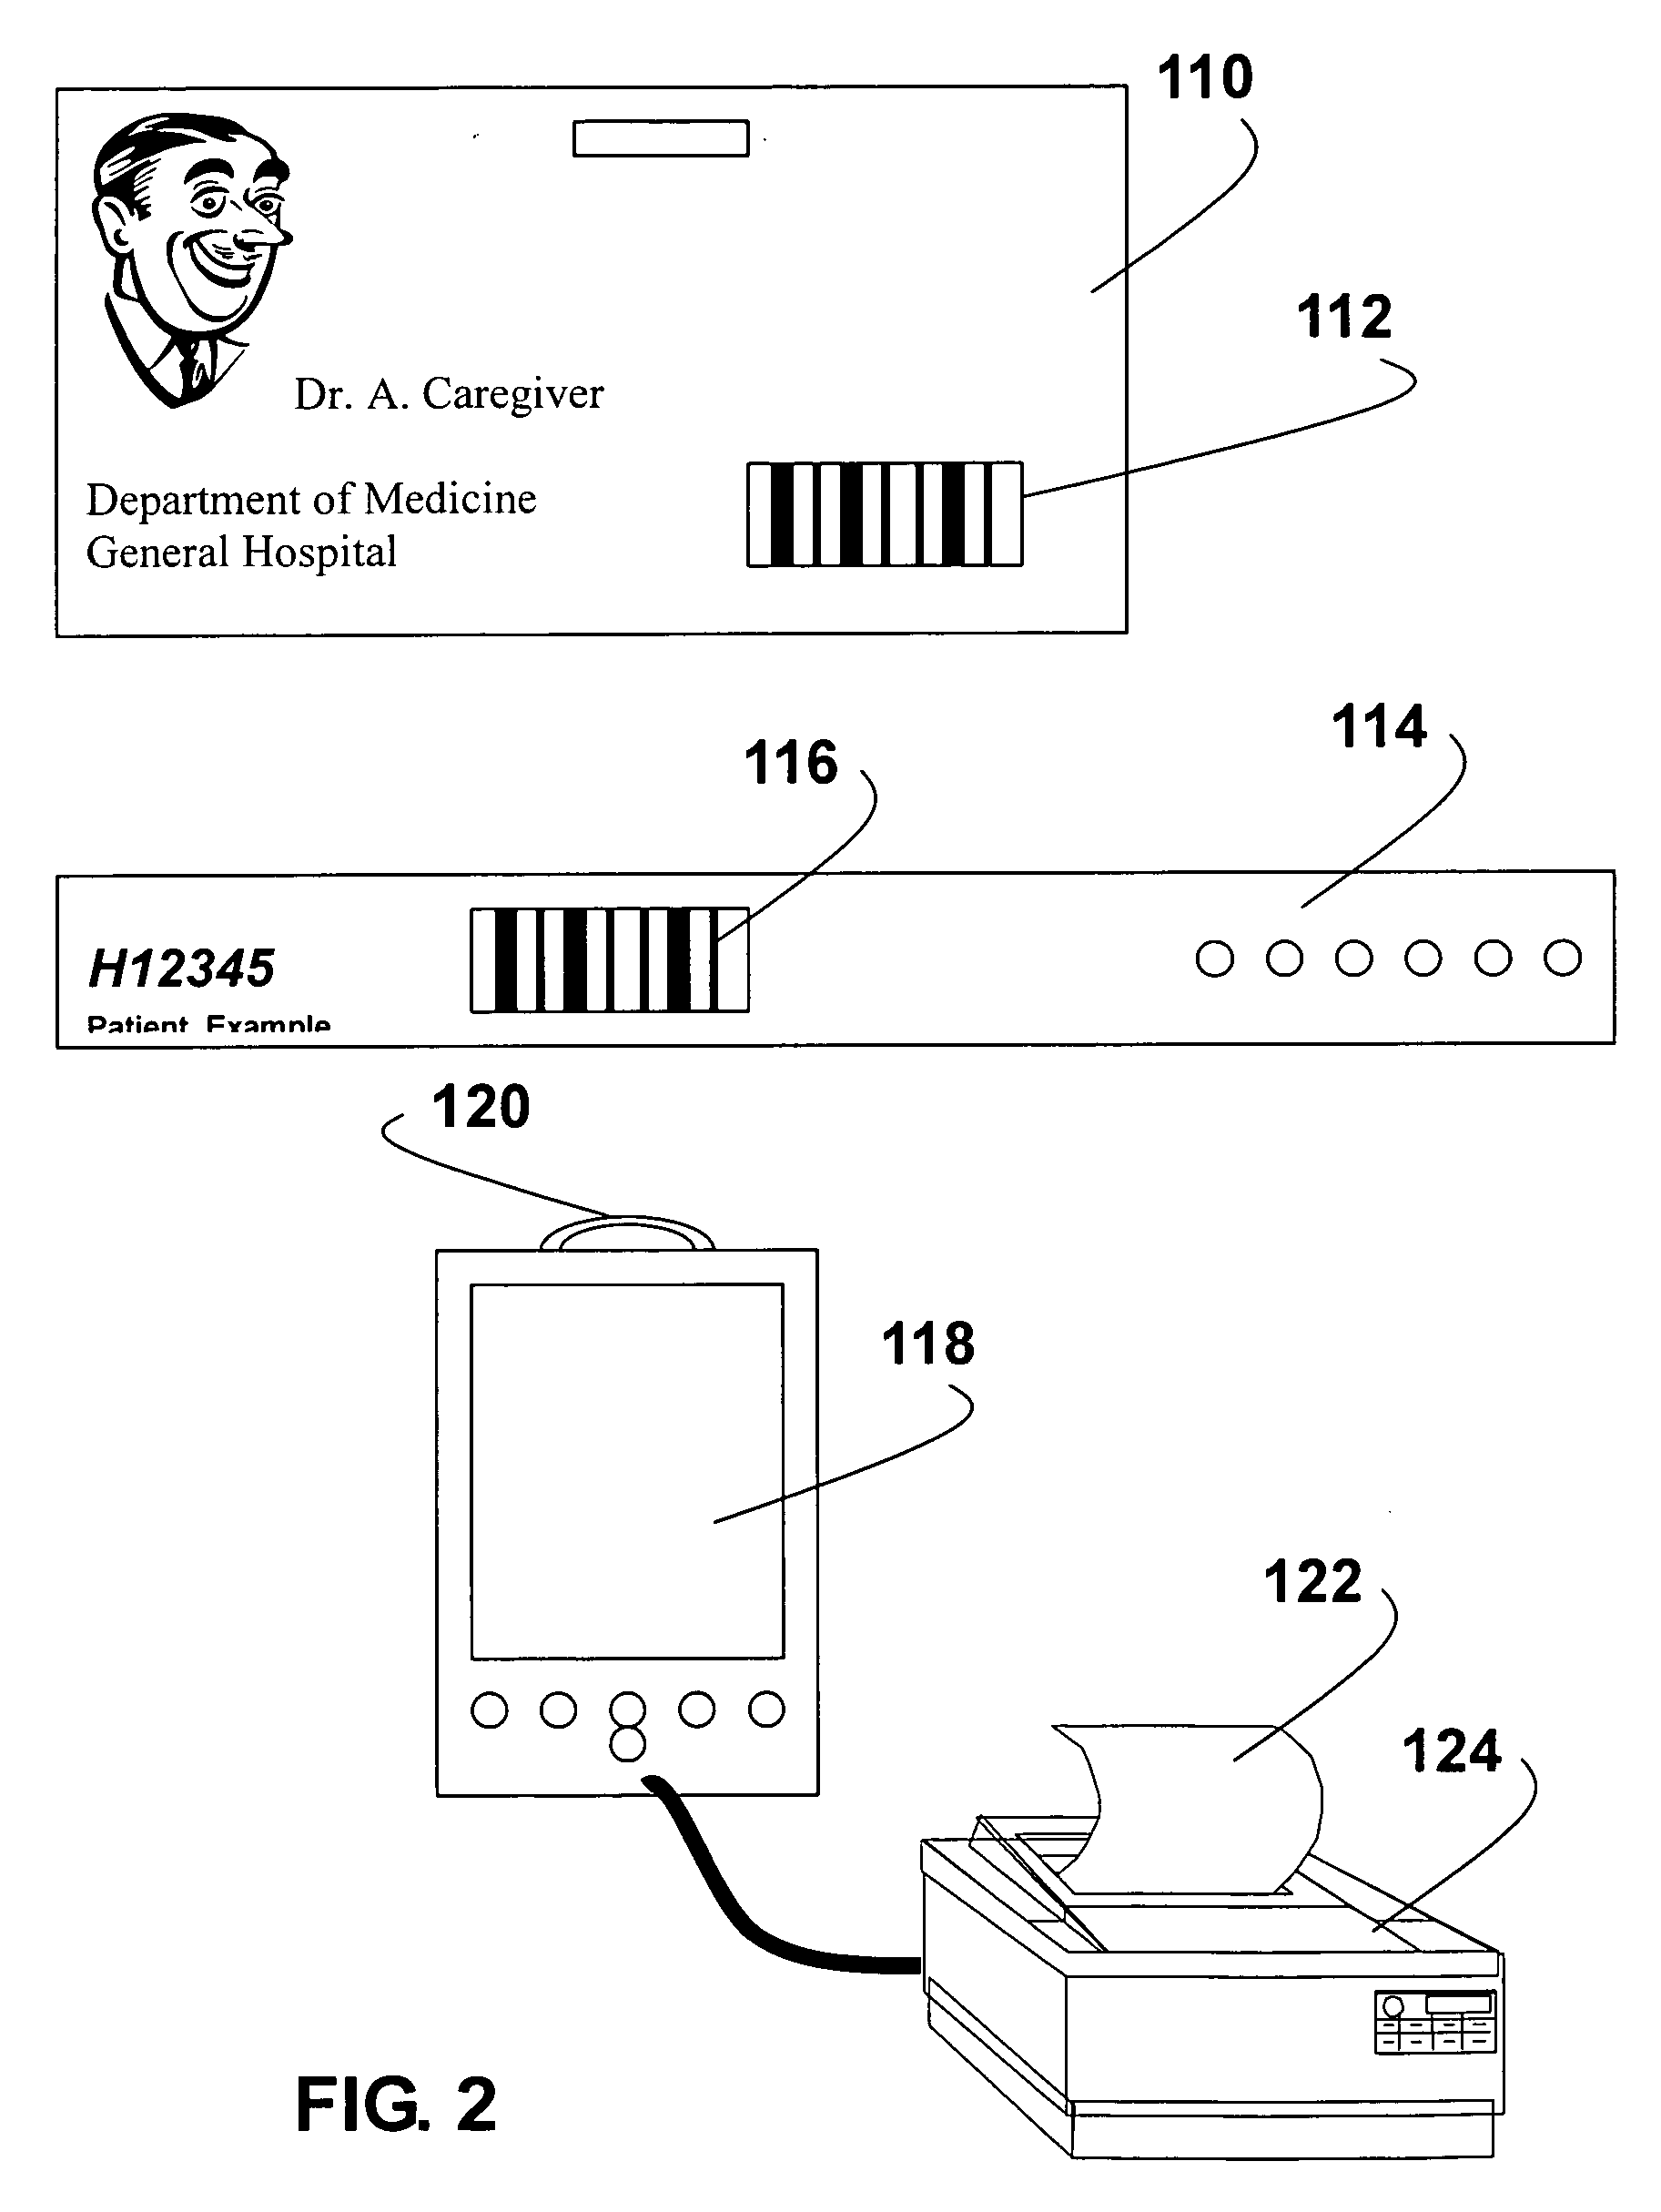 Apparatus and methods for monitoring transfusion of blood